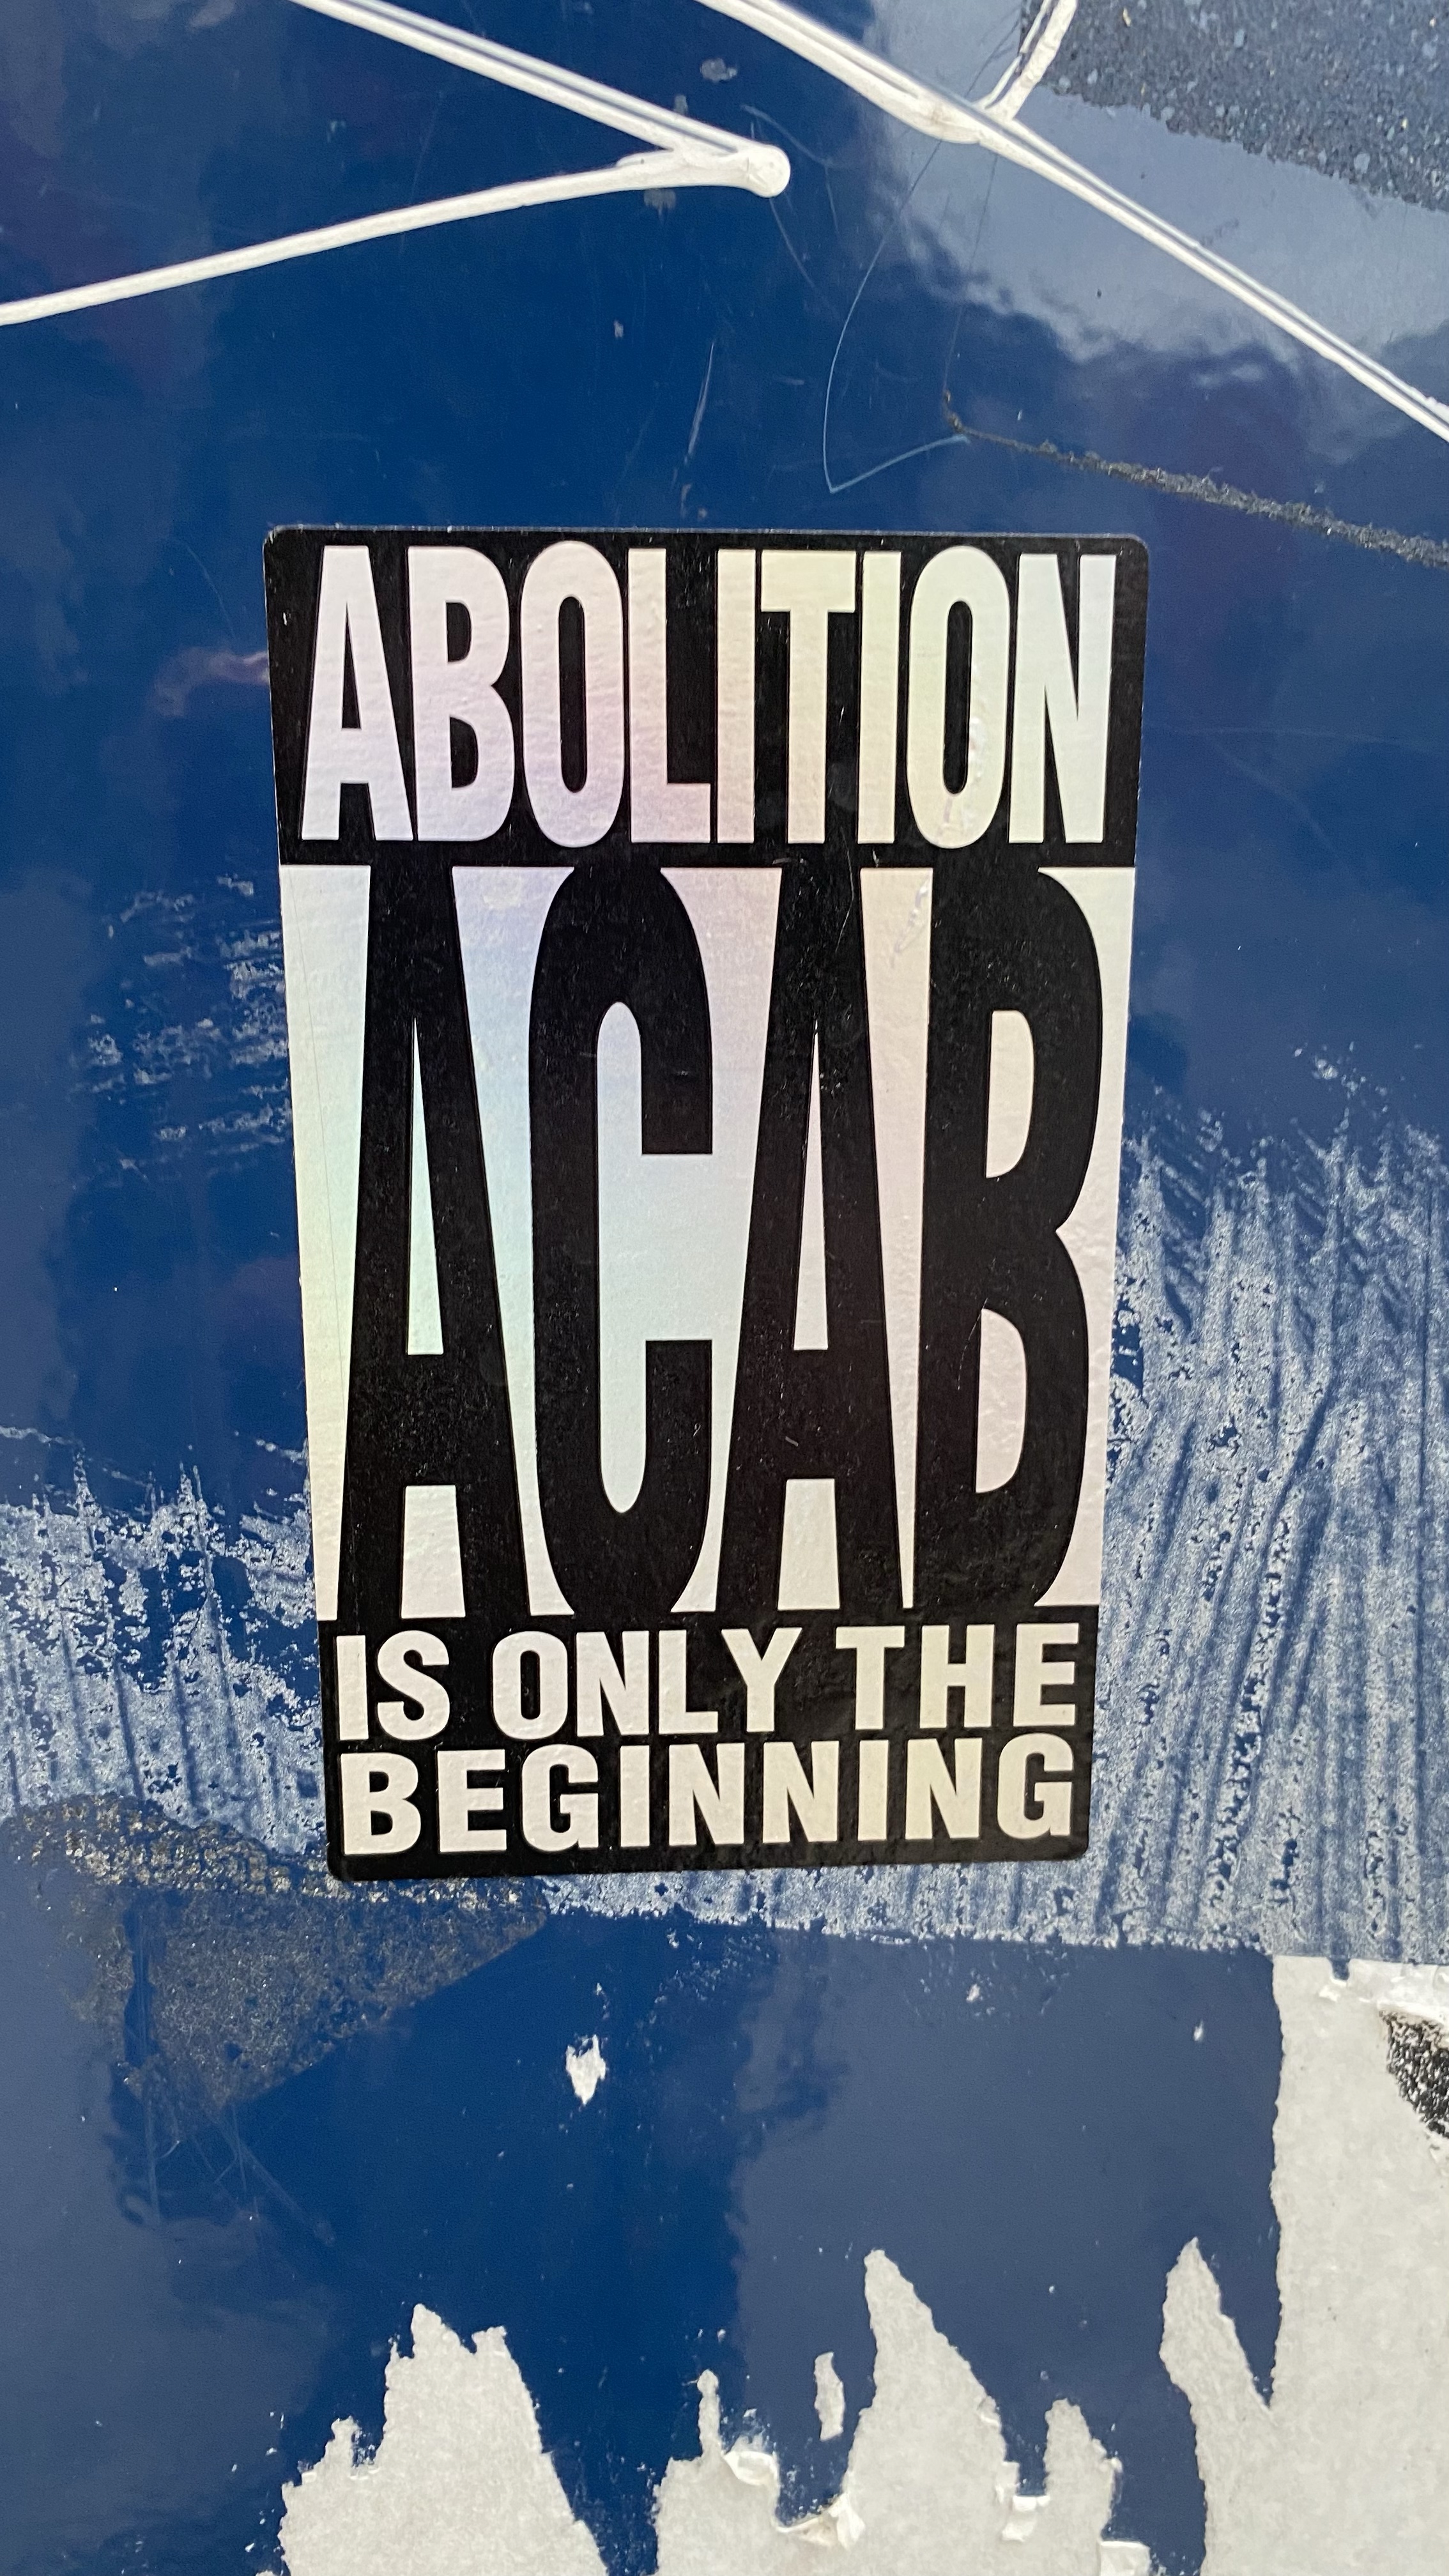 Abolition in only the Beginning